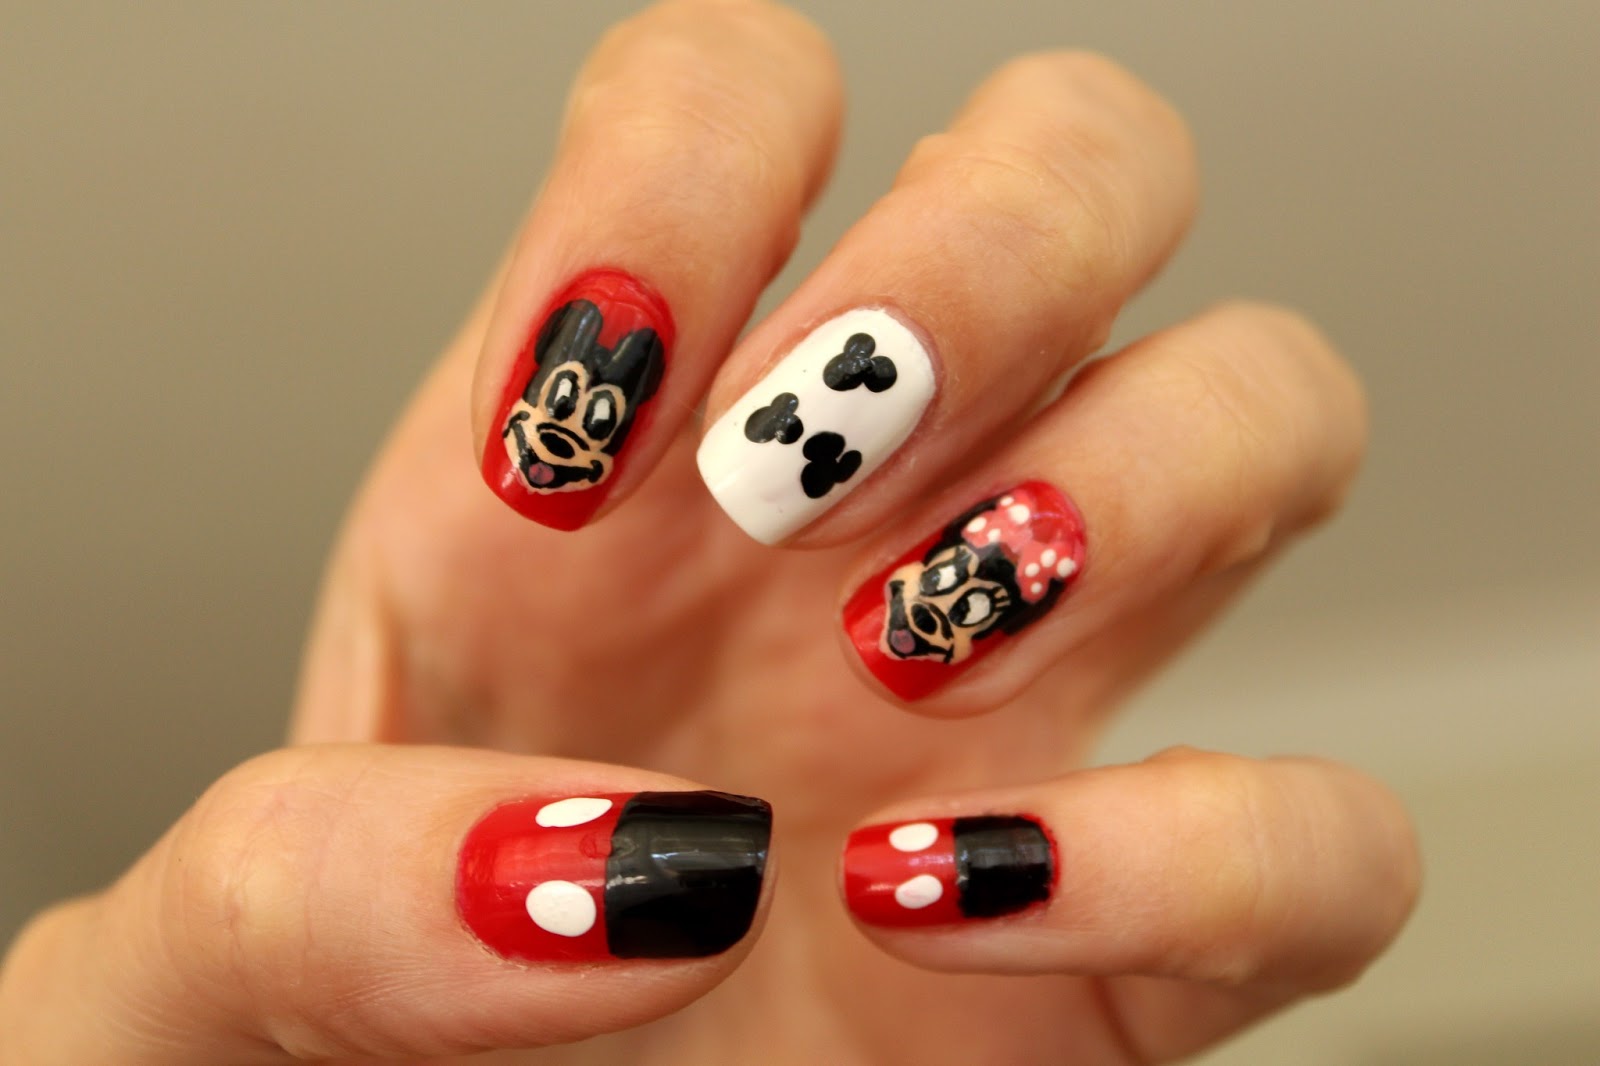 4. Mickey Mouse Nail Art for Short Nails - wide 3